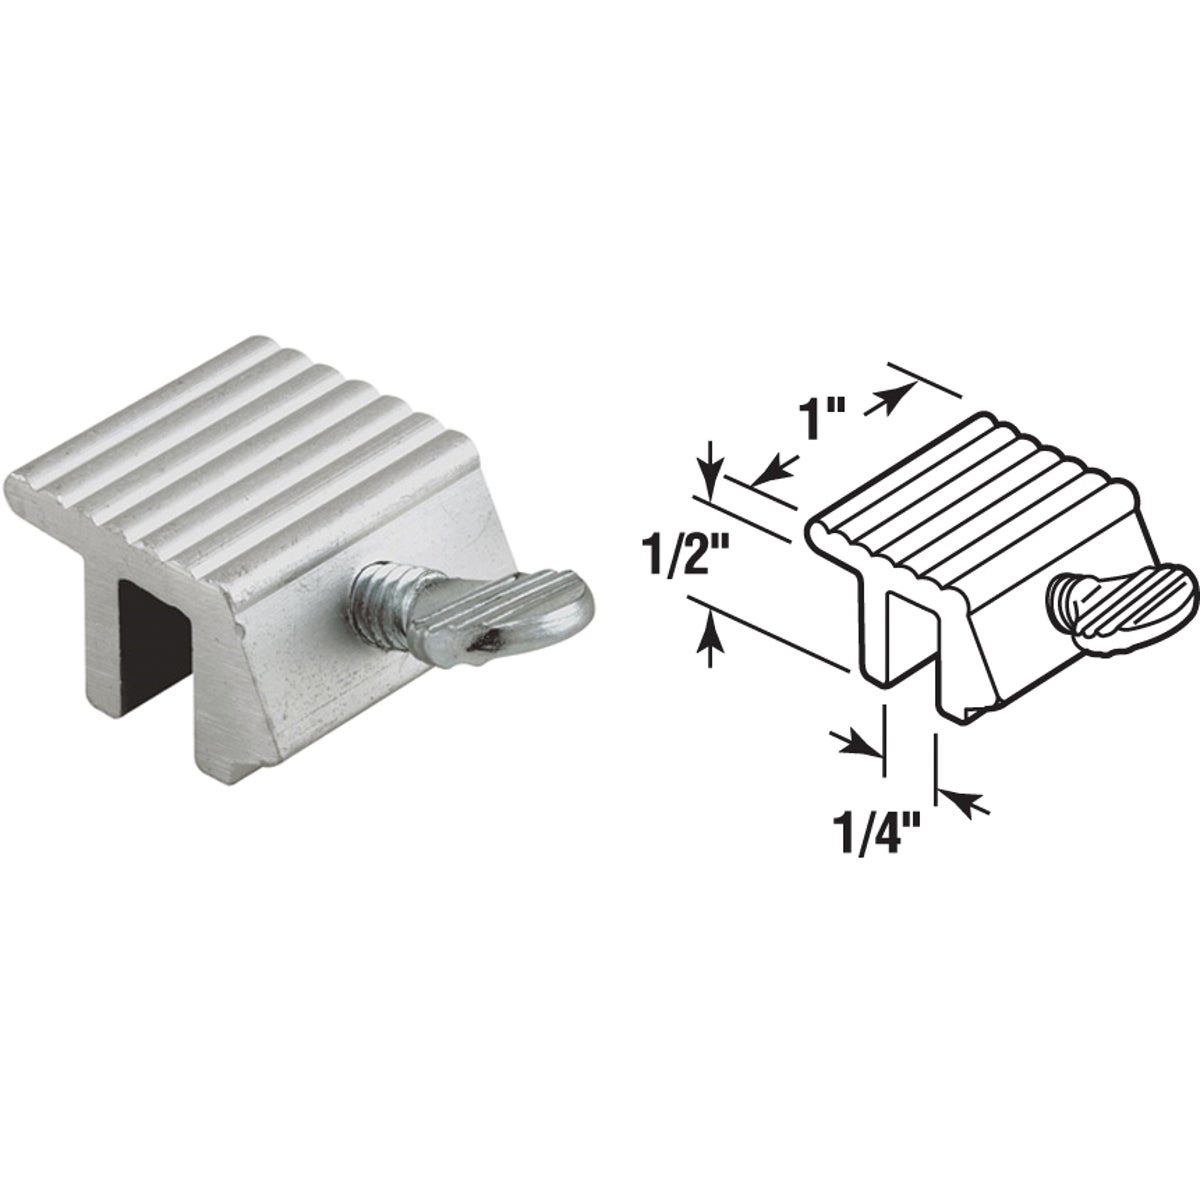 Item 236071, Heavy-duty extruded aluminum lock with steel thumbscrew for use on metal 